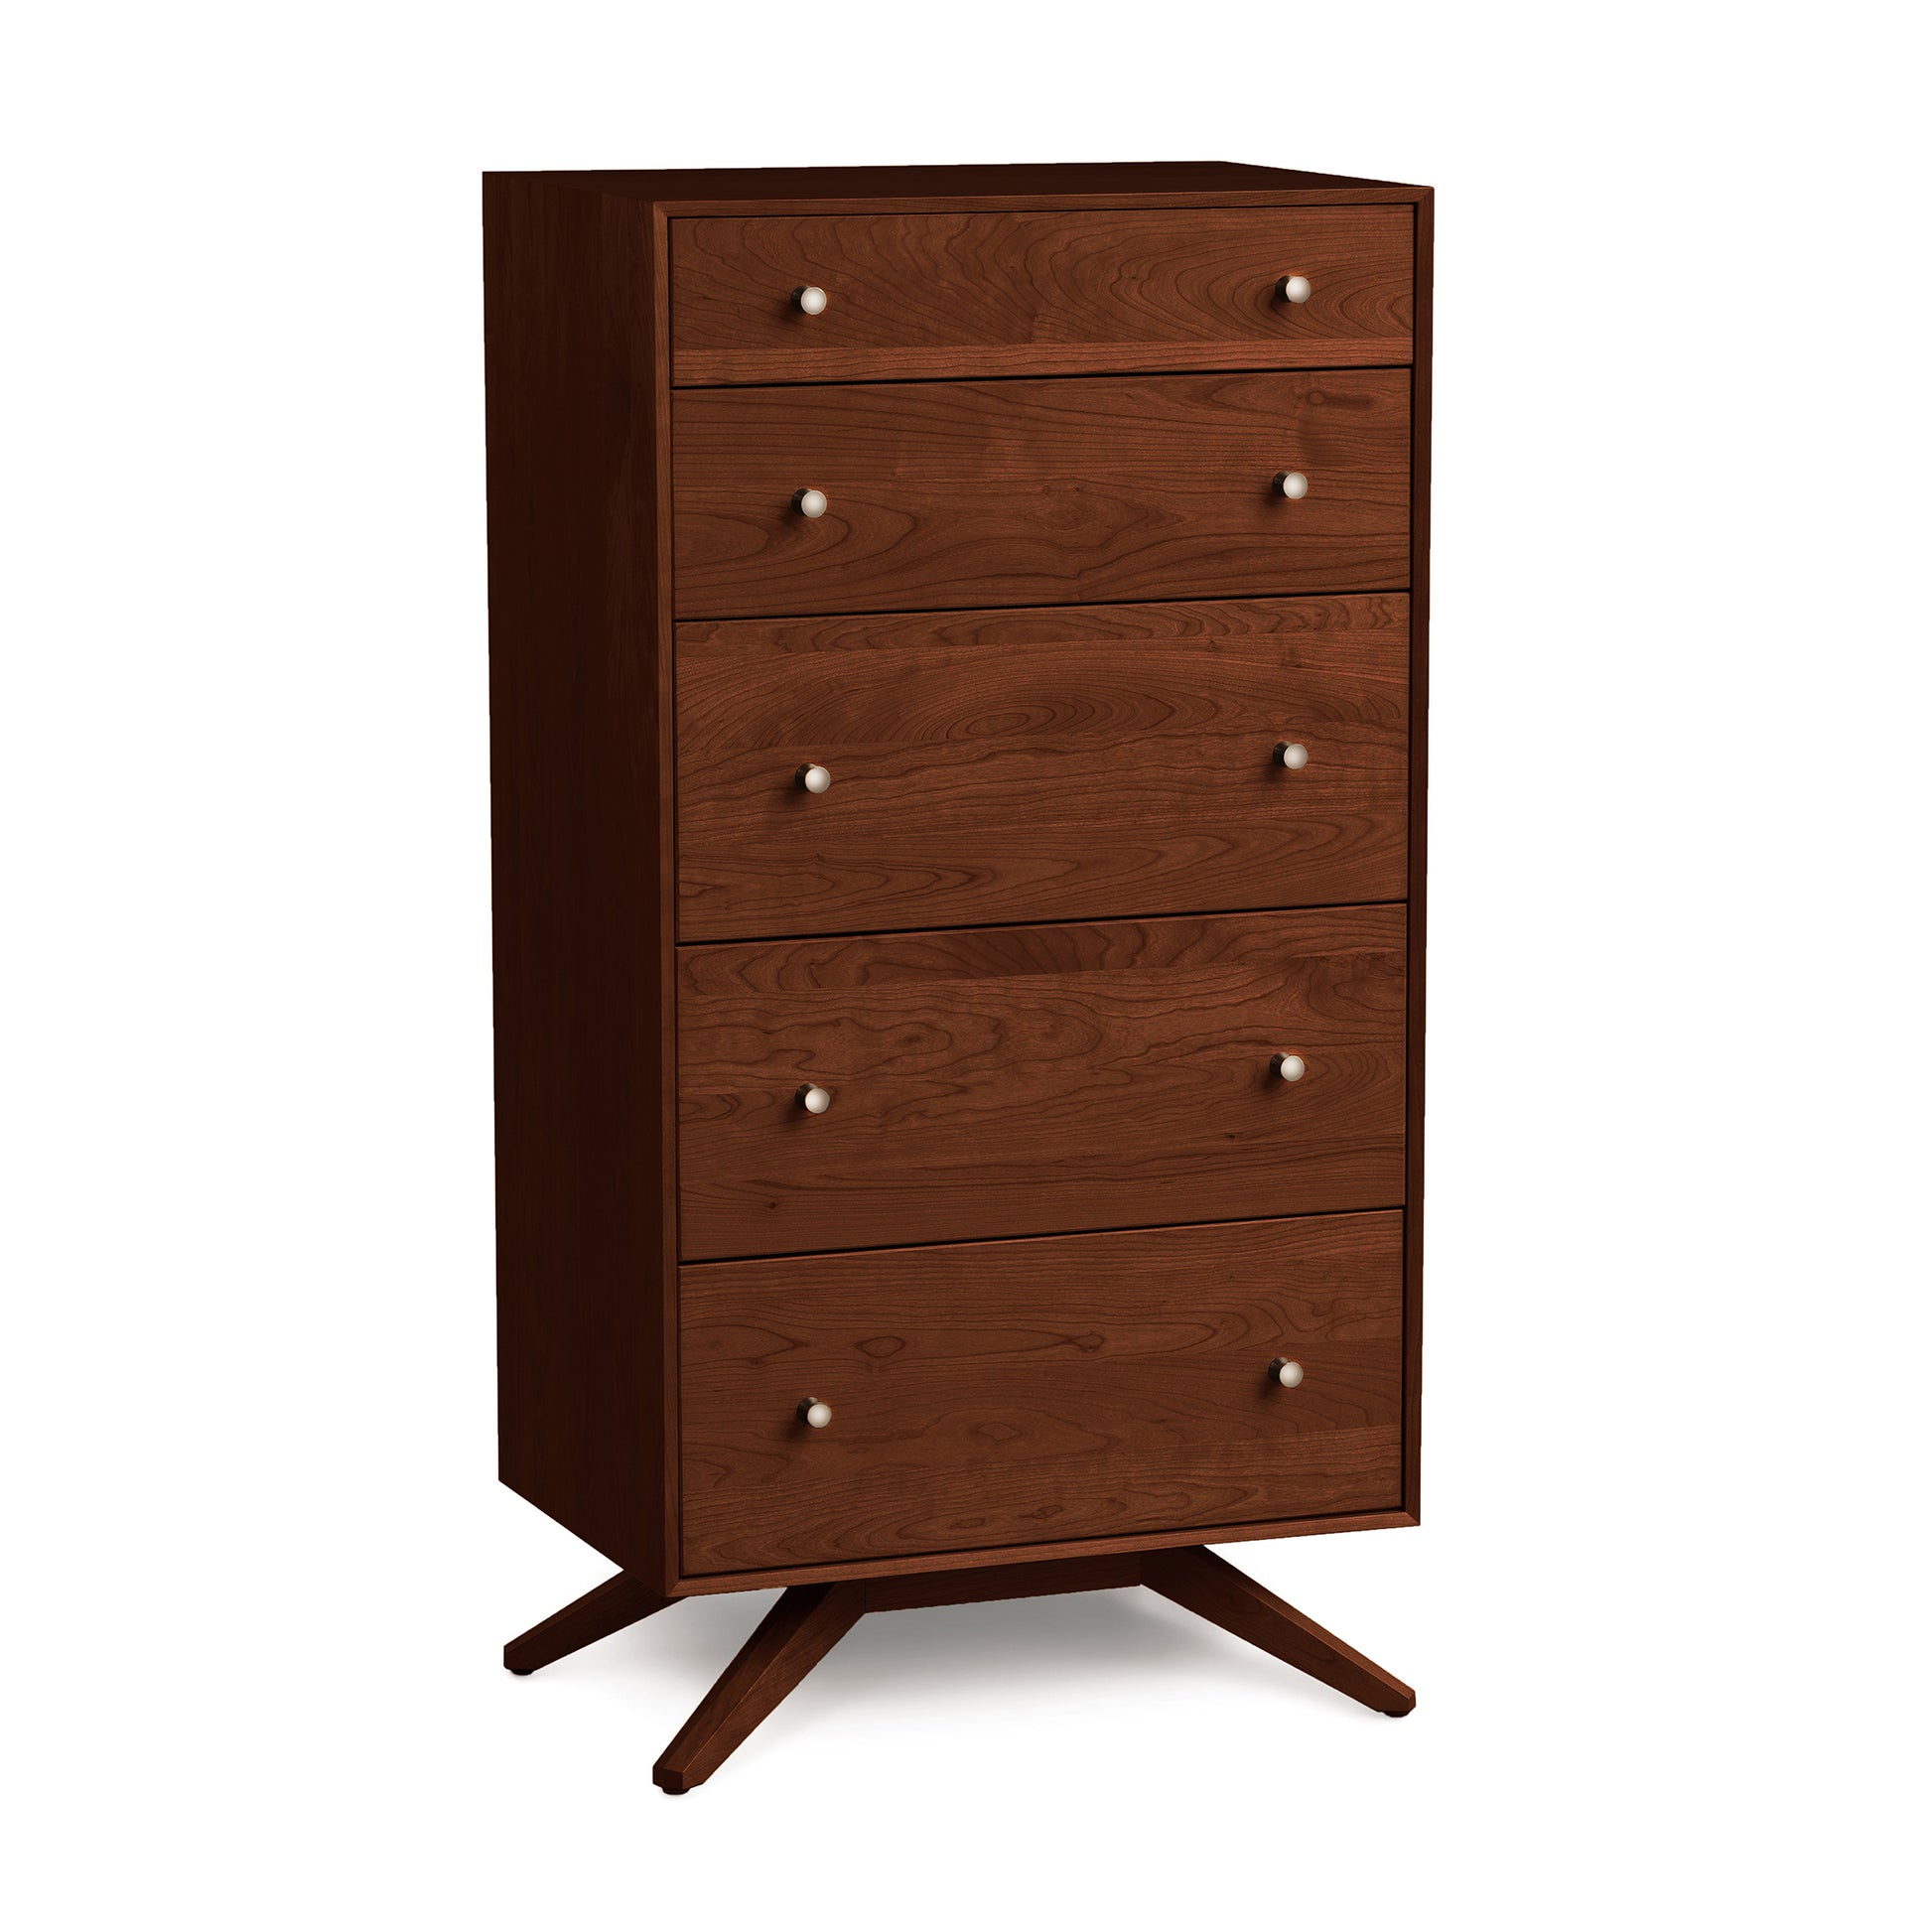 A Solid Cherry Hardwood Copeland Furniture Astrid Cherry 5-Drawer Chest with round knobs, standing on angled legs against a white background.